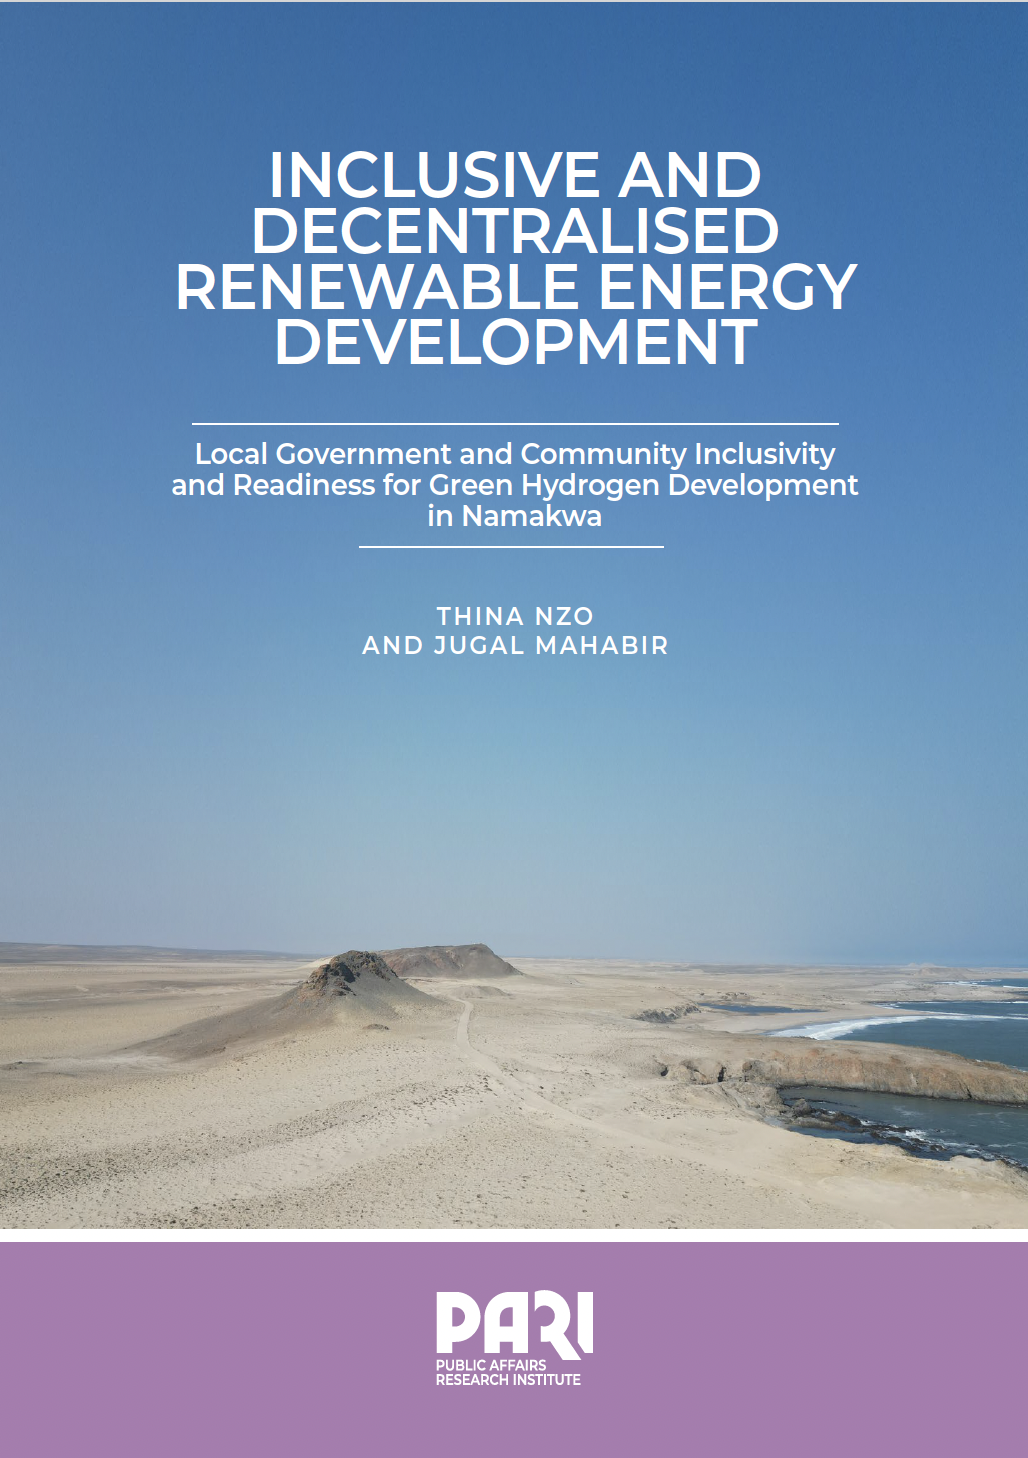 Inclusive and Decentralised Renewable Energy Development : Local government community inclusivity and readiness for green hydrogen development in Namakwa District Municipality